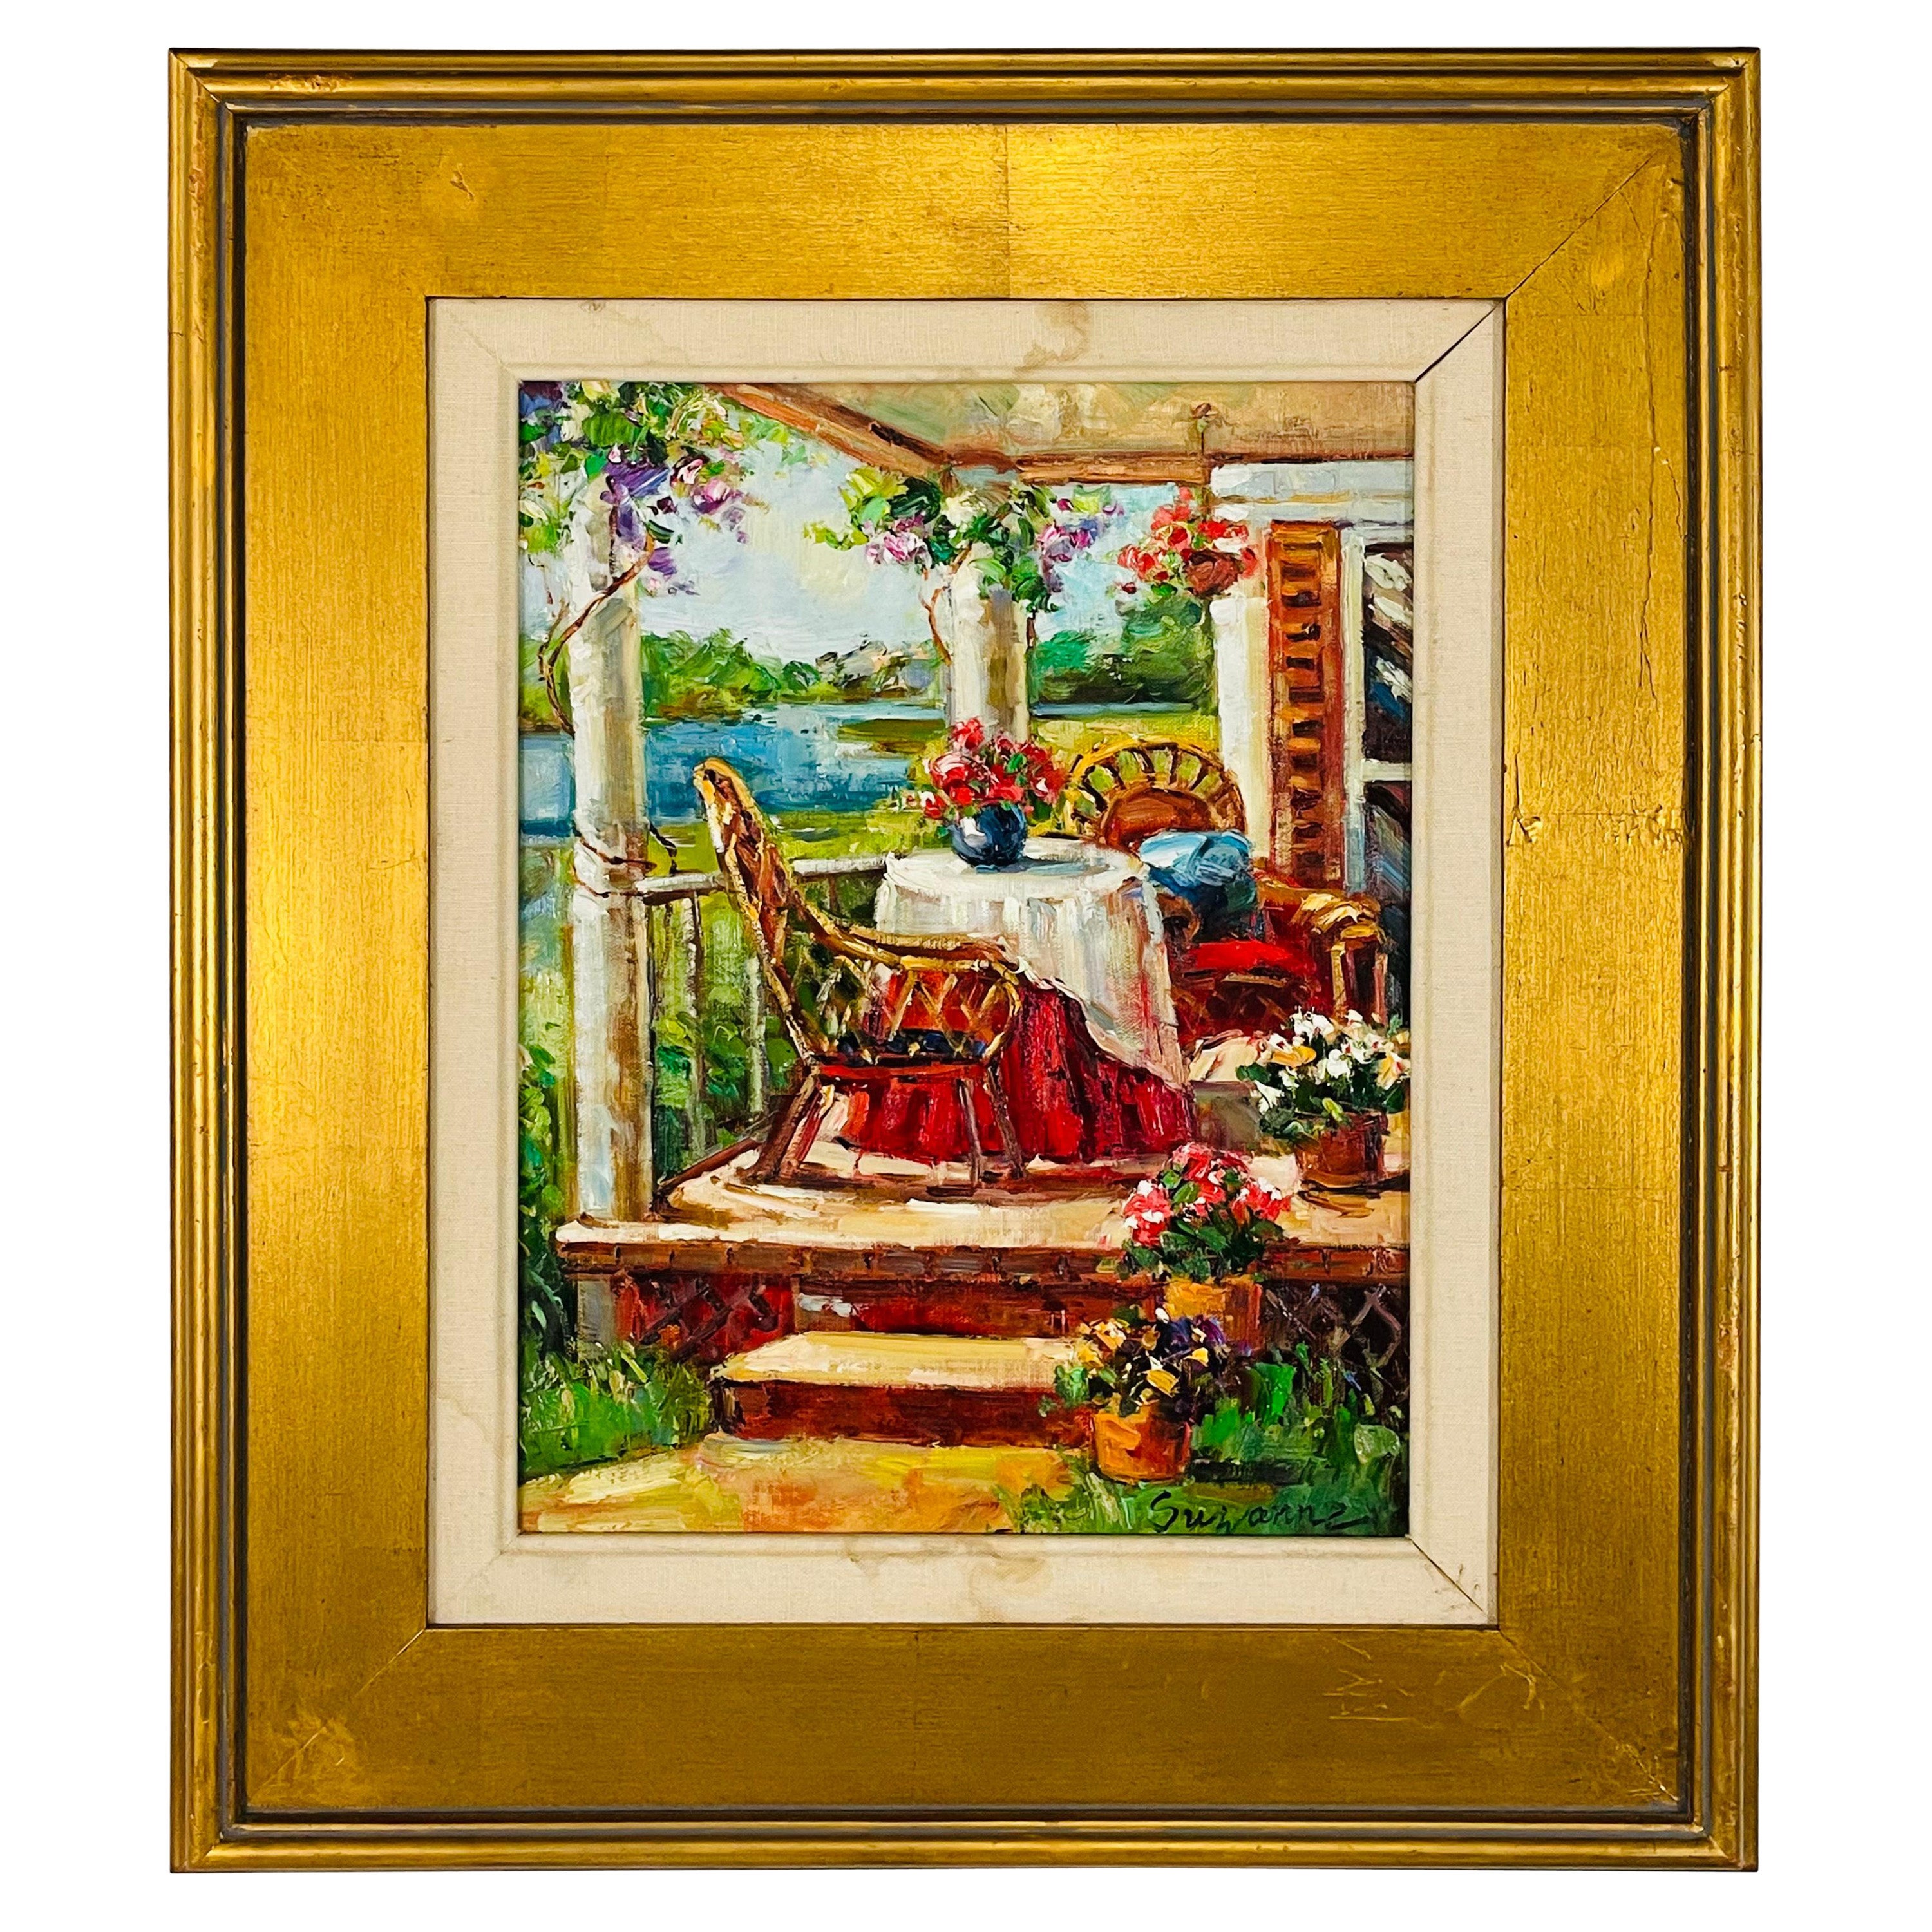 Vintage Oil on Canvas Painting of a Home Porch Signed by Artist in Gilt Frame